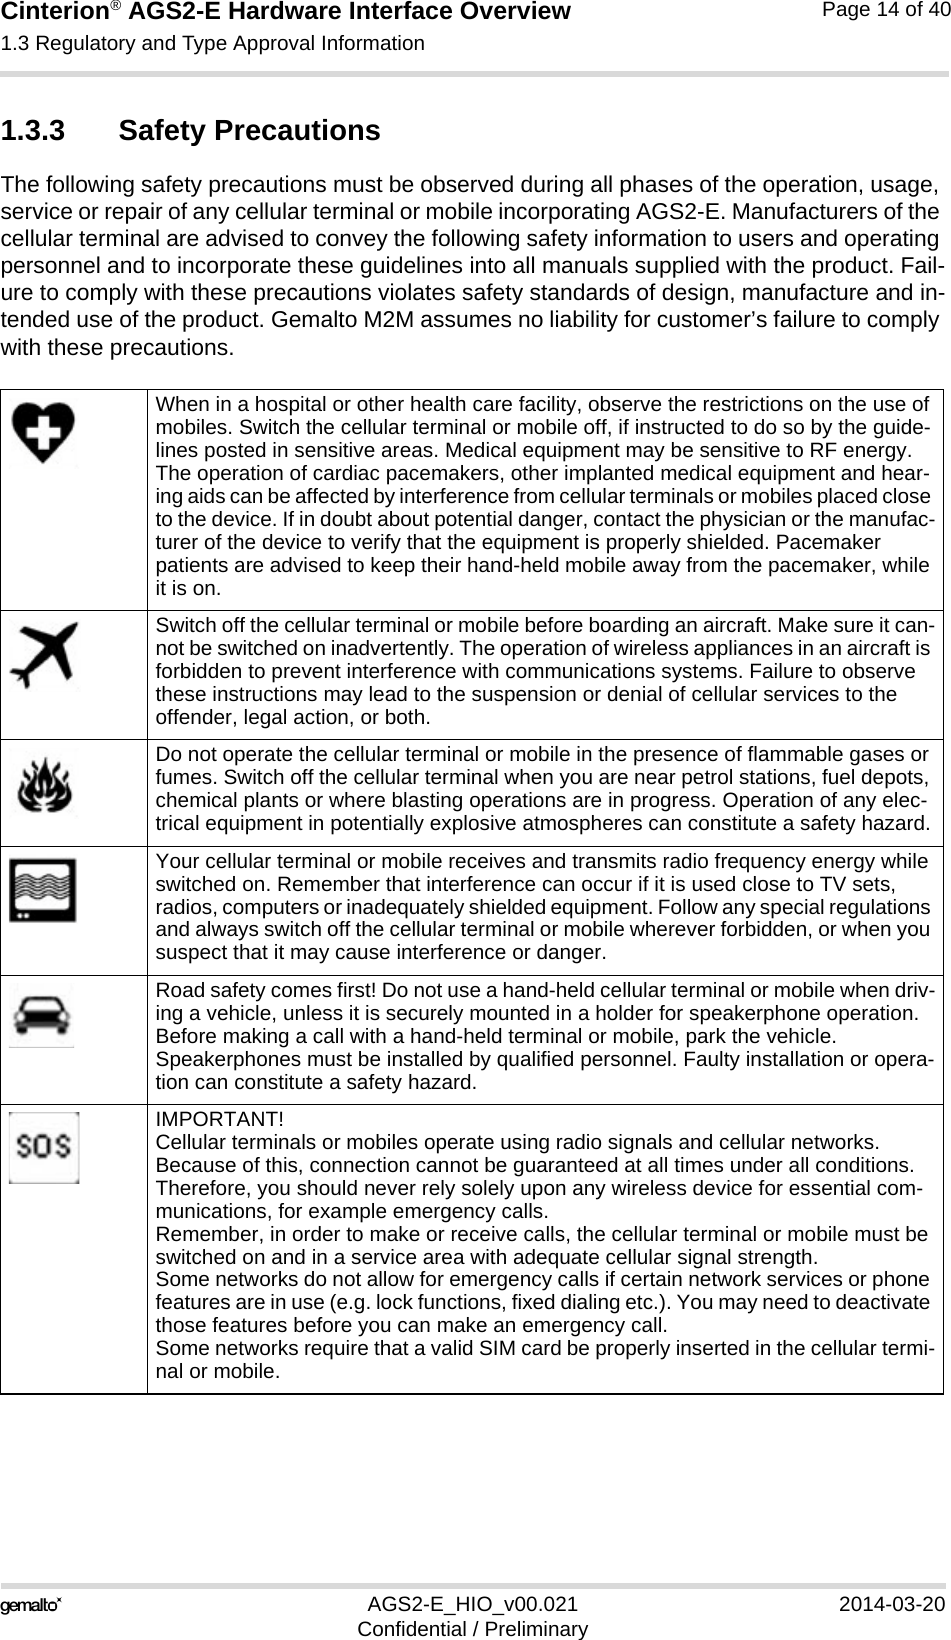 Cinterion® AGS2-E Hardware Interface Overview1.3 Regulatory and Type Approval Information14AGS2-E_HIO_v00.021 2014-03-20Confidential / PreliminaryPage 14 of 401.3.3 Safety PrecautionsThe following safety precautions must be observed during all phases of the operation, usage, service or repair of any cellular terminal or mobile incorporating AGS2-E. Manufacturers of the cellular terminal are advised to convey the following safety information to users and operating personnel and to incorporate these guidelines into all manuals supplied with the product. Fail-ure to comply with these precautions violates safety standards of design, manufacture and in-tended use of the product. Gemalto M2M assumes no liability for customer’s failure to comply with these precautions.When in a hospital or other health care facility, observe the restrictions on the use of mobiles. Switch the cellular terminal or mobile off, if instructed to do so by the guide-lines posted in sensitive areas. Medical equipment may be sensitive to RF energy. The operation of cardiac pacemakers, other implanted medical equipment and hear-ing aids can be affected by interference from cellular terminals or mobiles placed close to the device. If in doubt about potential danger, contact the physician or the manufac-turer of the device to verify that the equipment is properly shielded. Pacemaker patients are advised to keep their hand-held mobile away from the pacemaker, while it is on. Switch off the cellular terminal or mobile before boarding an aircraft. Make sure it can-not be switched on inadvertently. The operation of wireless appliances in an aircraft is forbidden to prevent interference with communications systems. Failure to observe these instructions may lead to the suspension or denial of cellular services to the offender, legal action, or both.Do not operate the cellular terminal or mobile in the presence of flammable gases or fumes. Switch off the cellular terminal when you are near petrol stations, fuel depots, chemical plants or where blasting operations are in progress. Operation of any elec-trical equipment in potentially explosive atmospheres can constitute a safety hazard.Your cellular terminal or mobile receives and transmits radio frequency energy while switched on. Remember that interference can occur if it is used close to TV sets, radios, computers or inadequately shielded equipment. Follow any special regulations and always switch off the cellular terminal or mobile wherever forbidden, or when you suspect that it may cause interference or danger.Road safety comes first! Do not use a hand-held cellular terminal or mobile when driv-ing a vehicle, unless it is securely mounted in a holder for speakerphone operation. Before making a call with a hand-held terminal or mobile, park the vehicle. Speakerphones must be installed by qualified personnel. Faulty installation or opera-tion can constitute a safety hazard.IMPORTANT!Cellular terminals or mobiles operate using radio signals and cellular networks. Because of this, connection cannot be guaranteed at all times under all conditions. Therefore, you should never rely solely upon any wireless device for essential com-munications, for example emergency calls. Remember, in order to make or receive calls, the cellular terminal or mobile must be switched on and in a service area with adequate cellular signal strength. Some networks do not allow for emergency calls if certain network services or phone features are in use (e.g. lock functions, fixed dialing etc.). You may need to deactivate those features before you can make an emergency call.Some networks require that a valid SIM card be properly inserted in the cellular termi-nal or mobile.